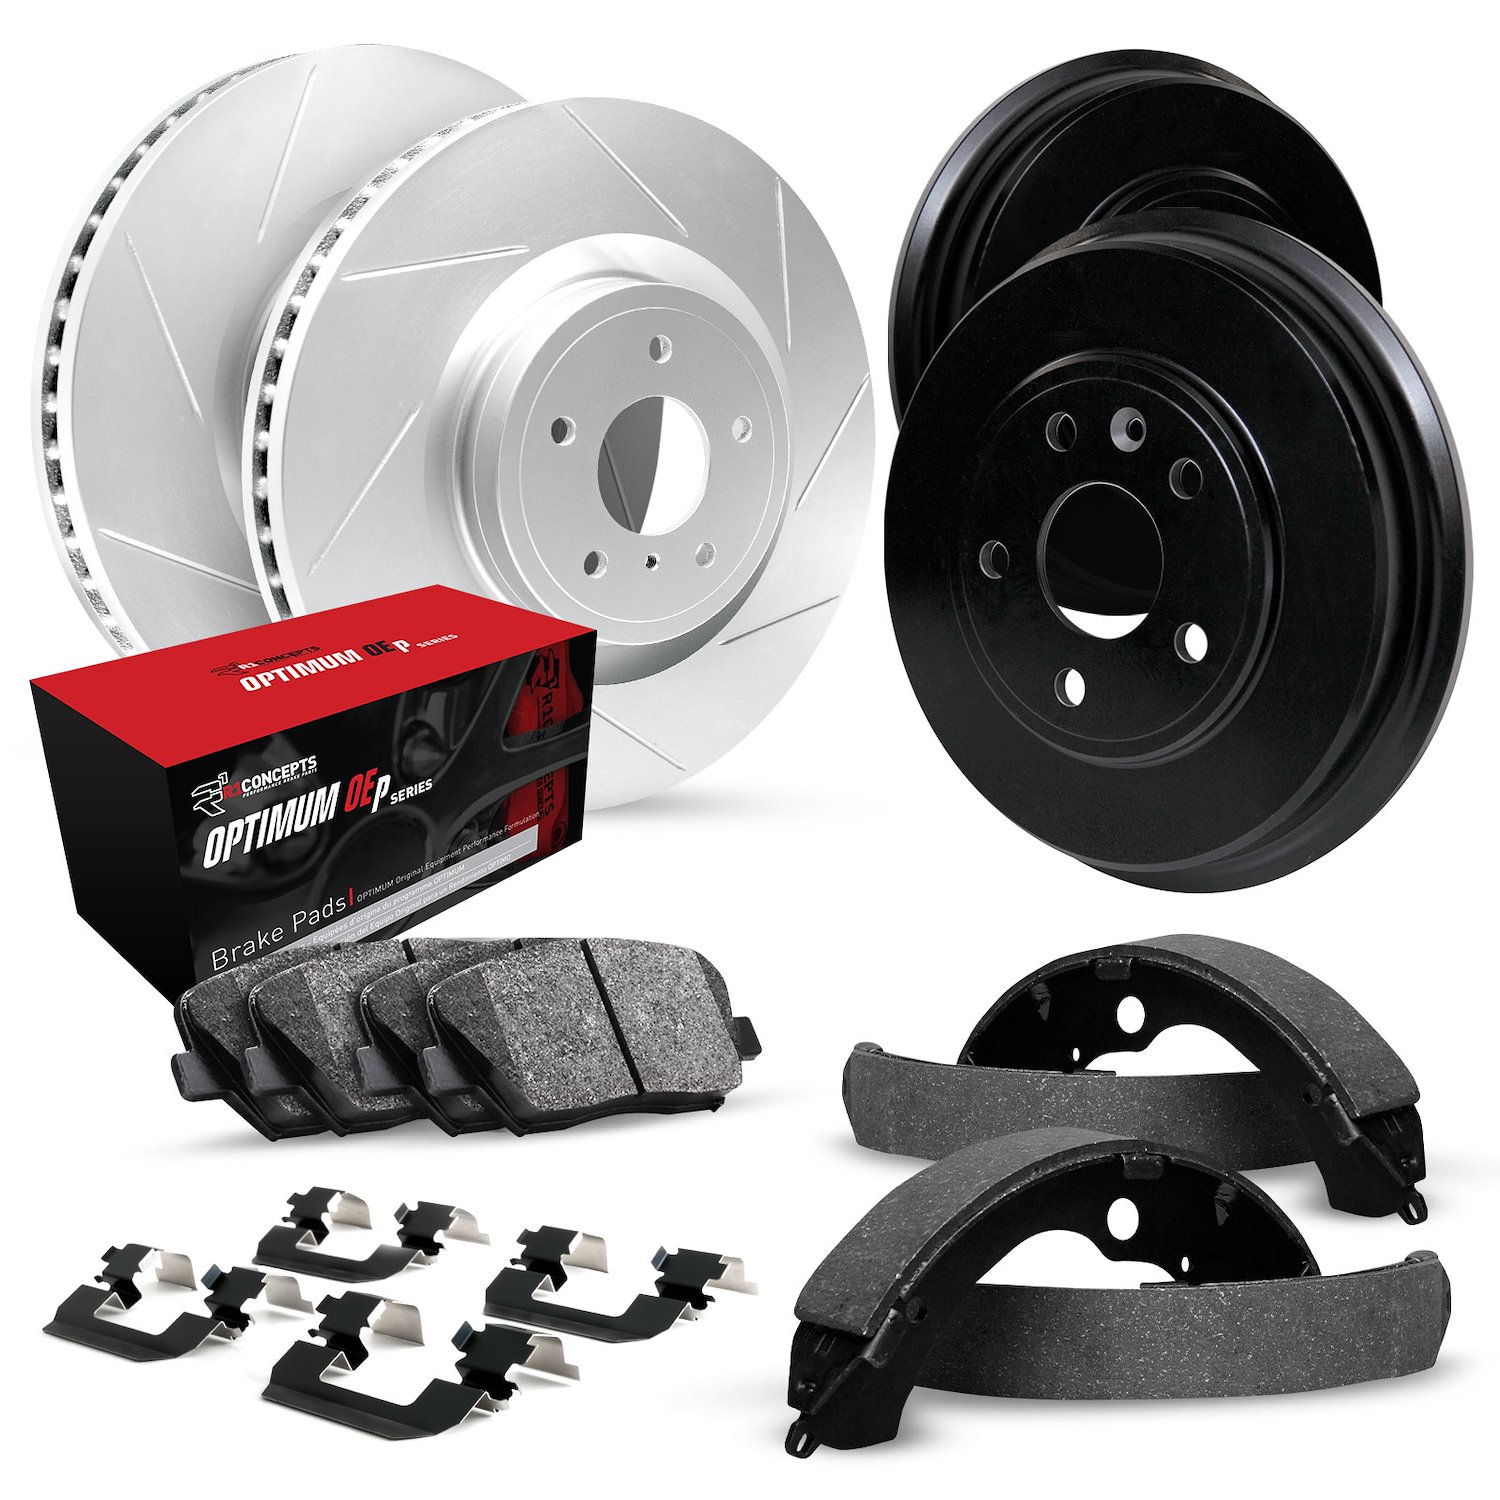 GEO-Carbon Slotted Brake Rotor & Drum Set w/Optimum OE Pads, Shoes, & Hardware, 1979-1991 GM, Position: Front & Rear